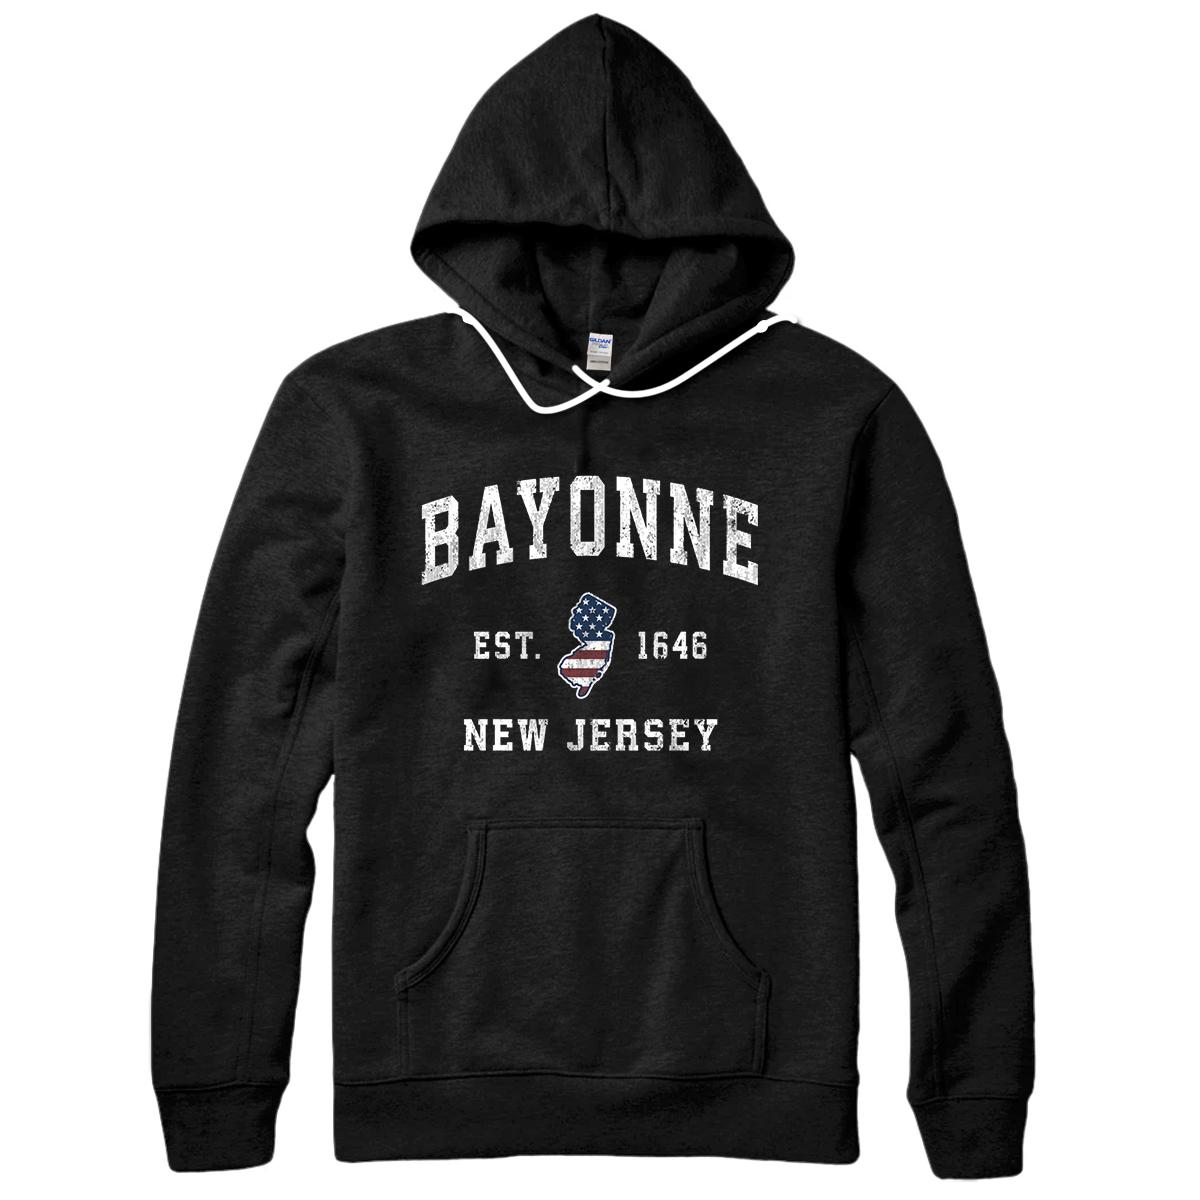 Personalized Bayonne New Jersey NJ Vintage American Flag Sports Design Pullover Hoodie